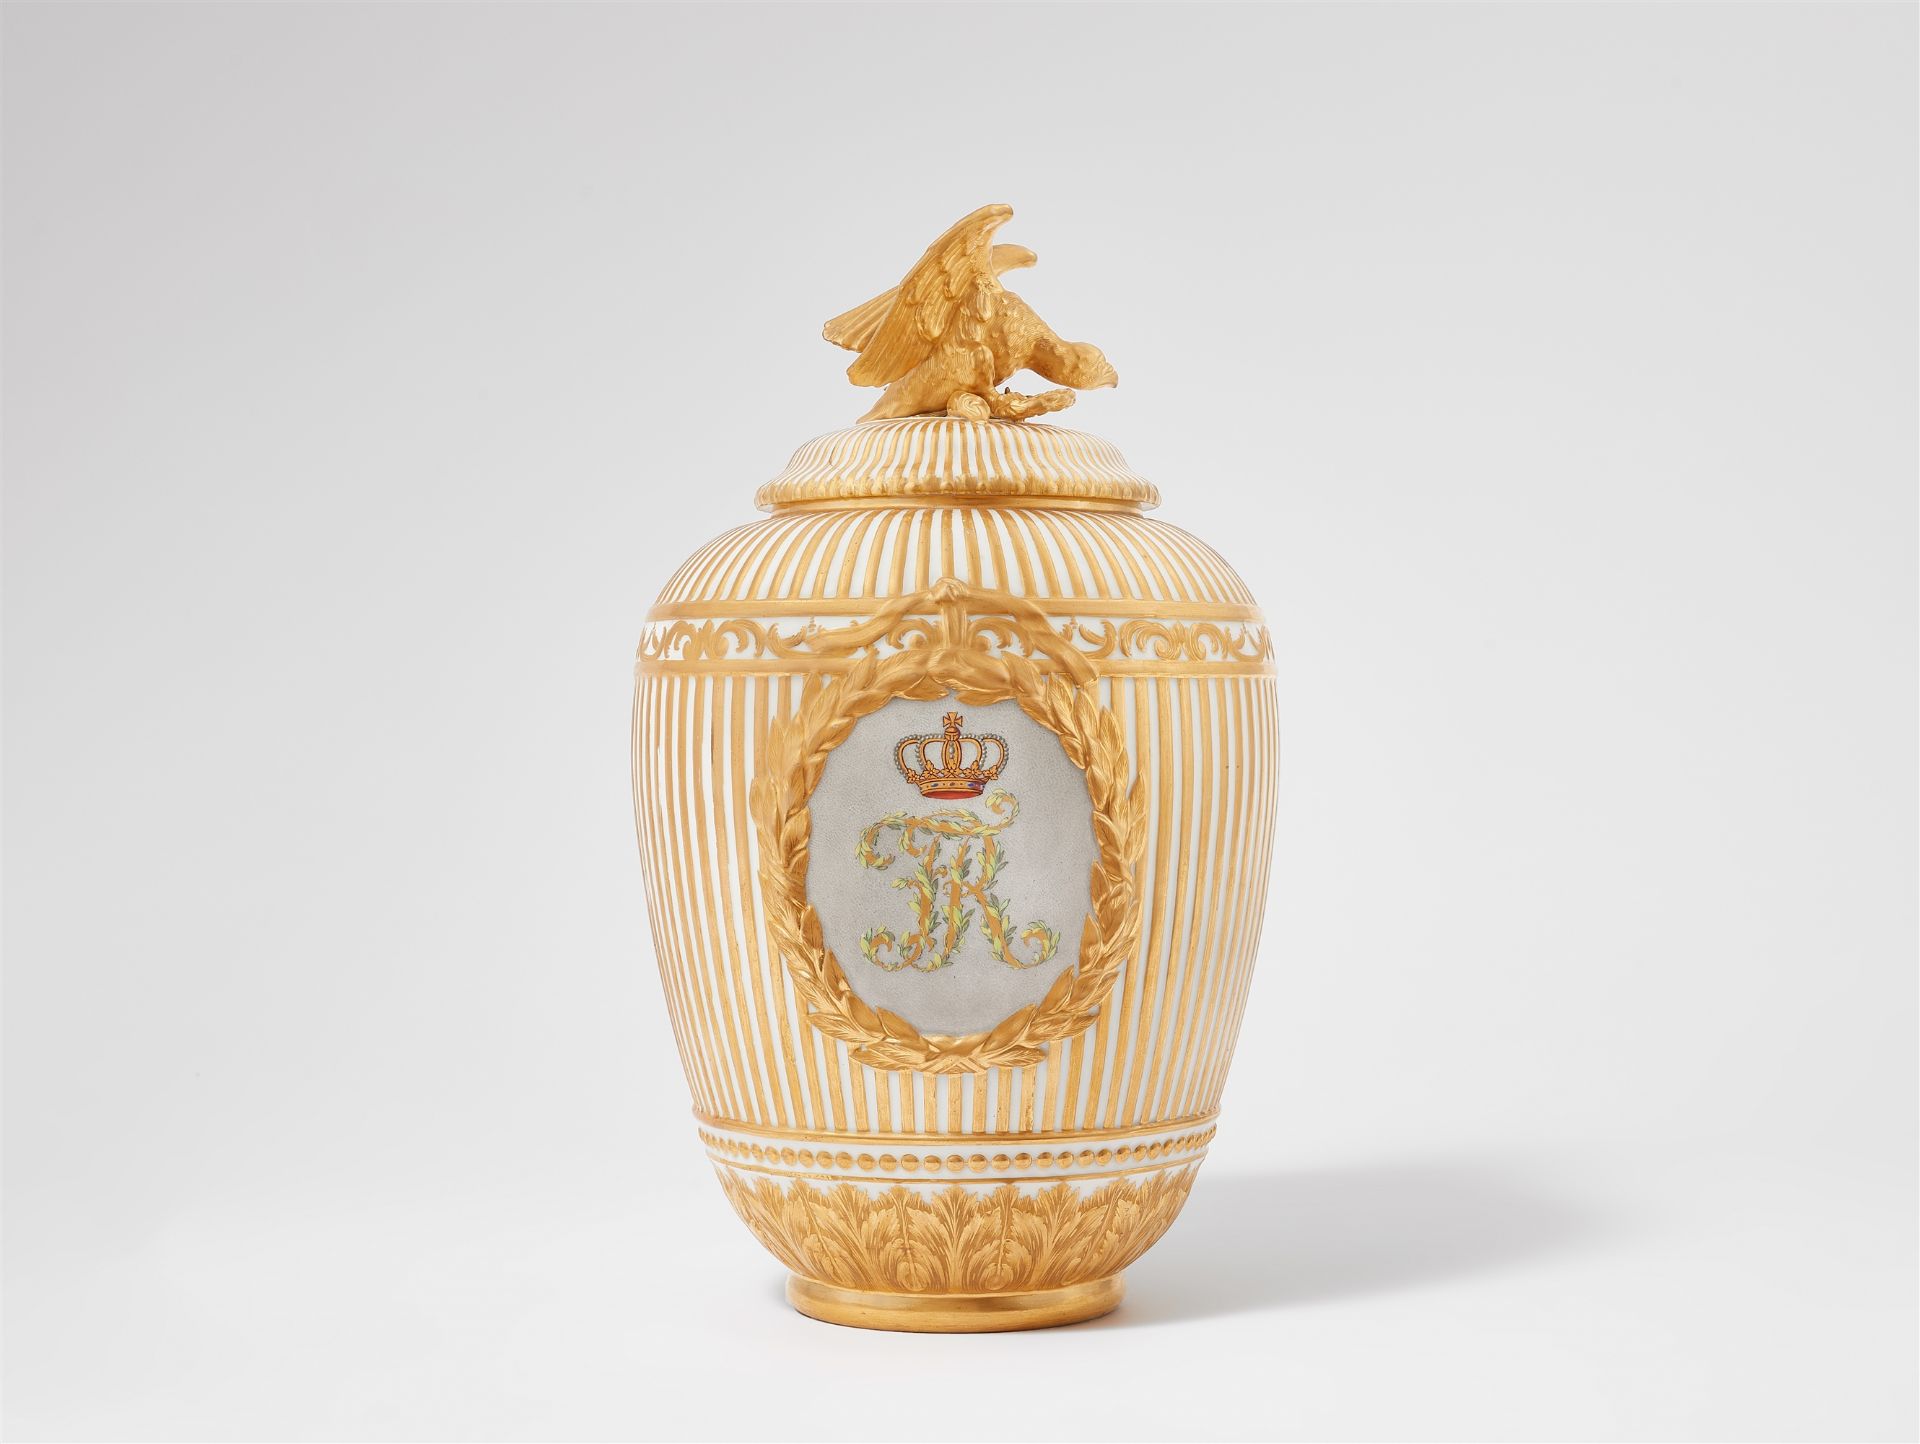 A Berlin KPM porcelain vase and cover with a portrait of King Frederick II from the possession of th - Image 2 of 5